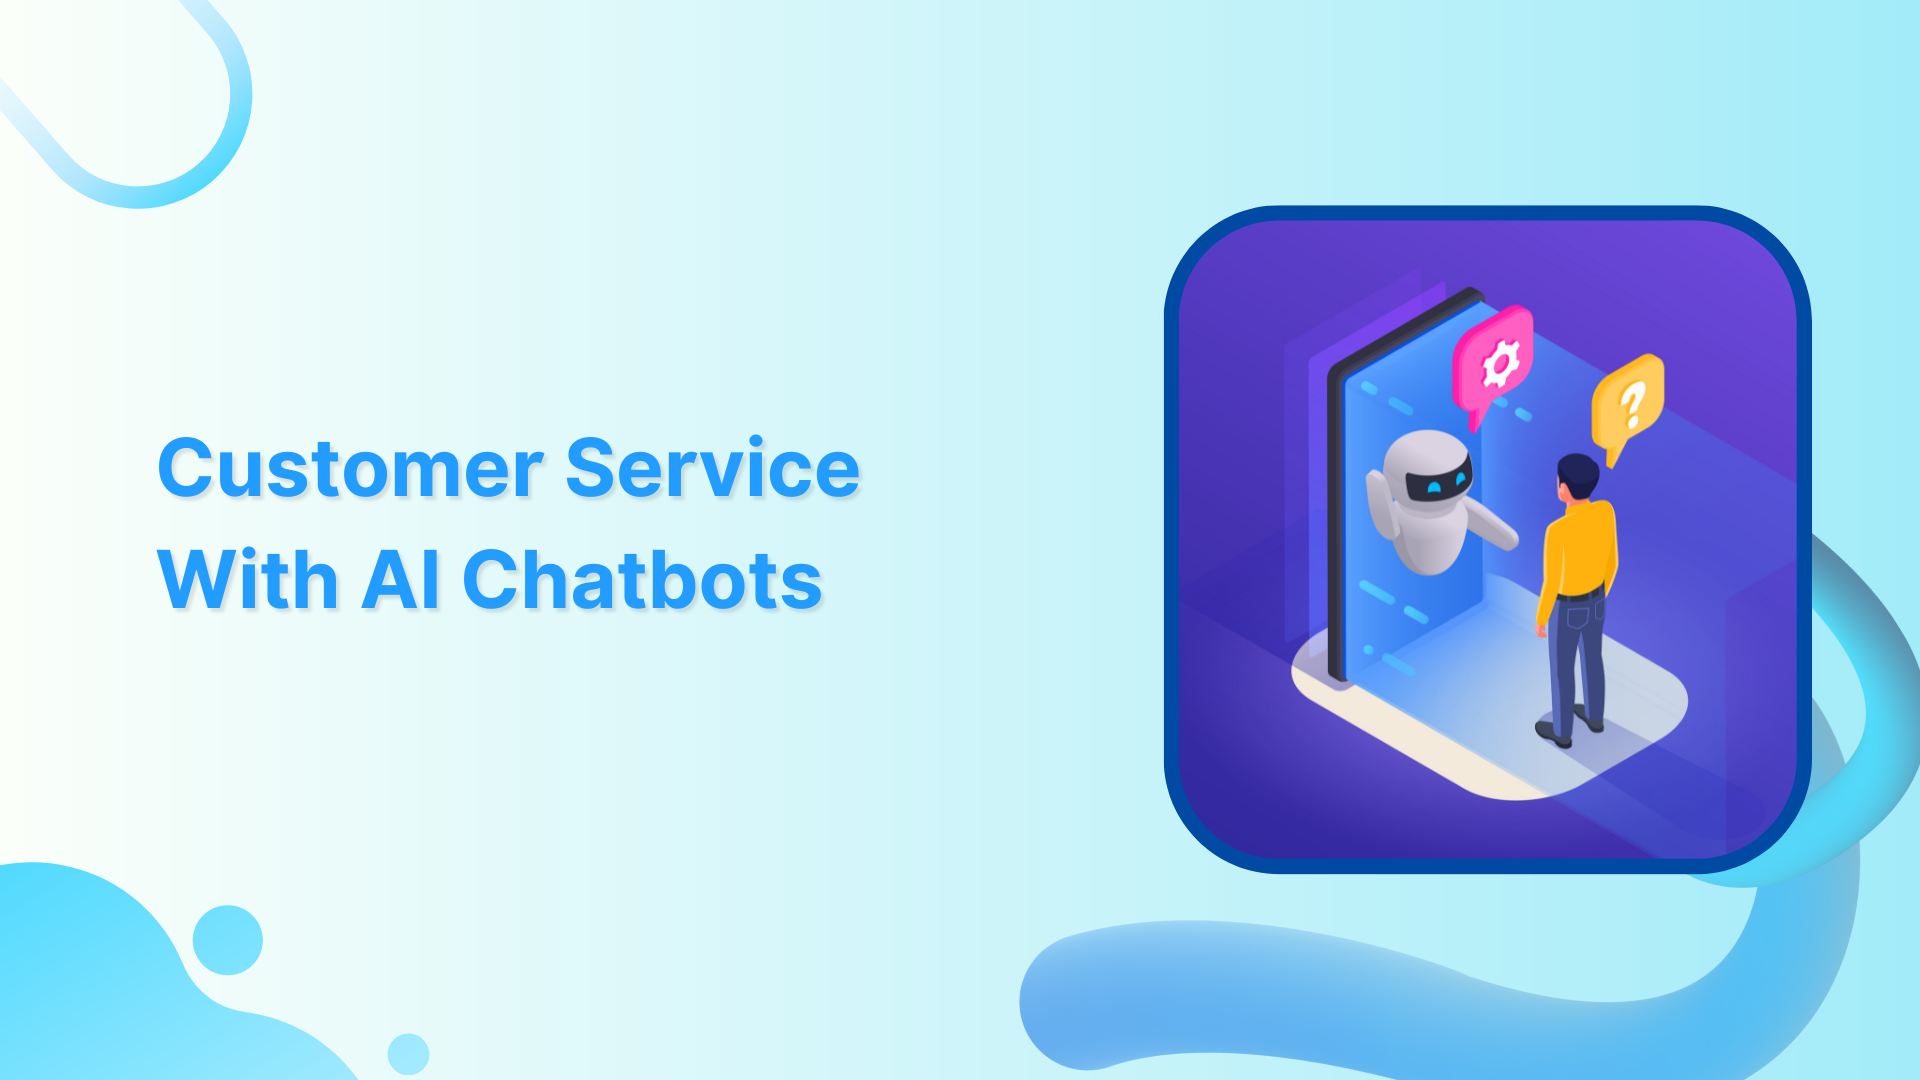 Enhancing Customer Service With AI Chatbots: The Key Benefits